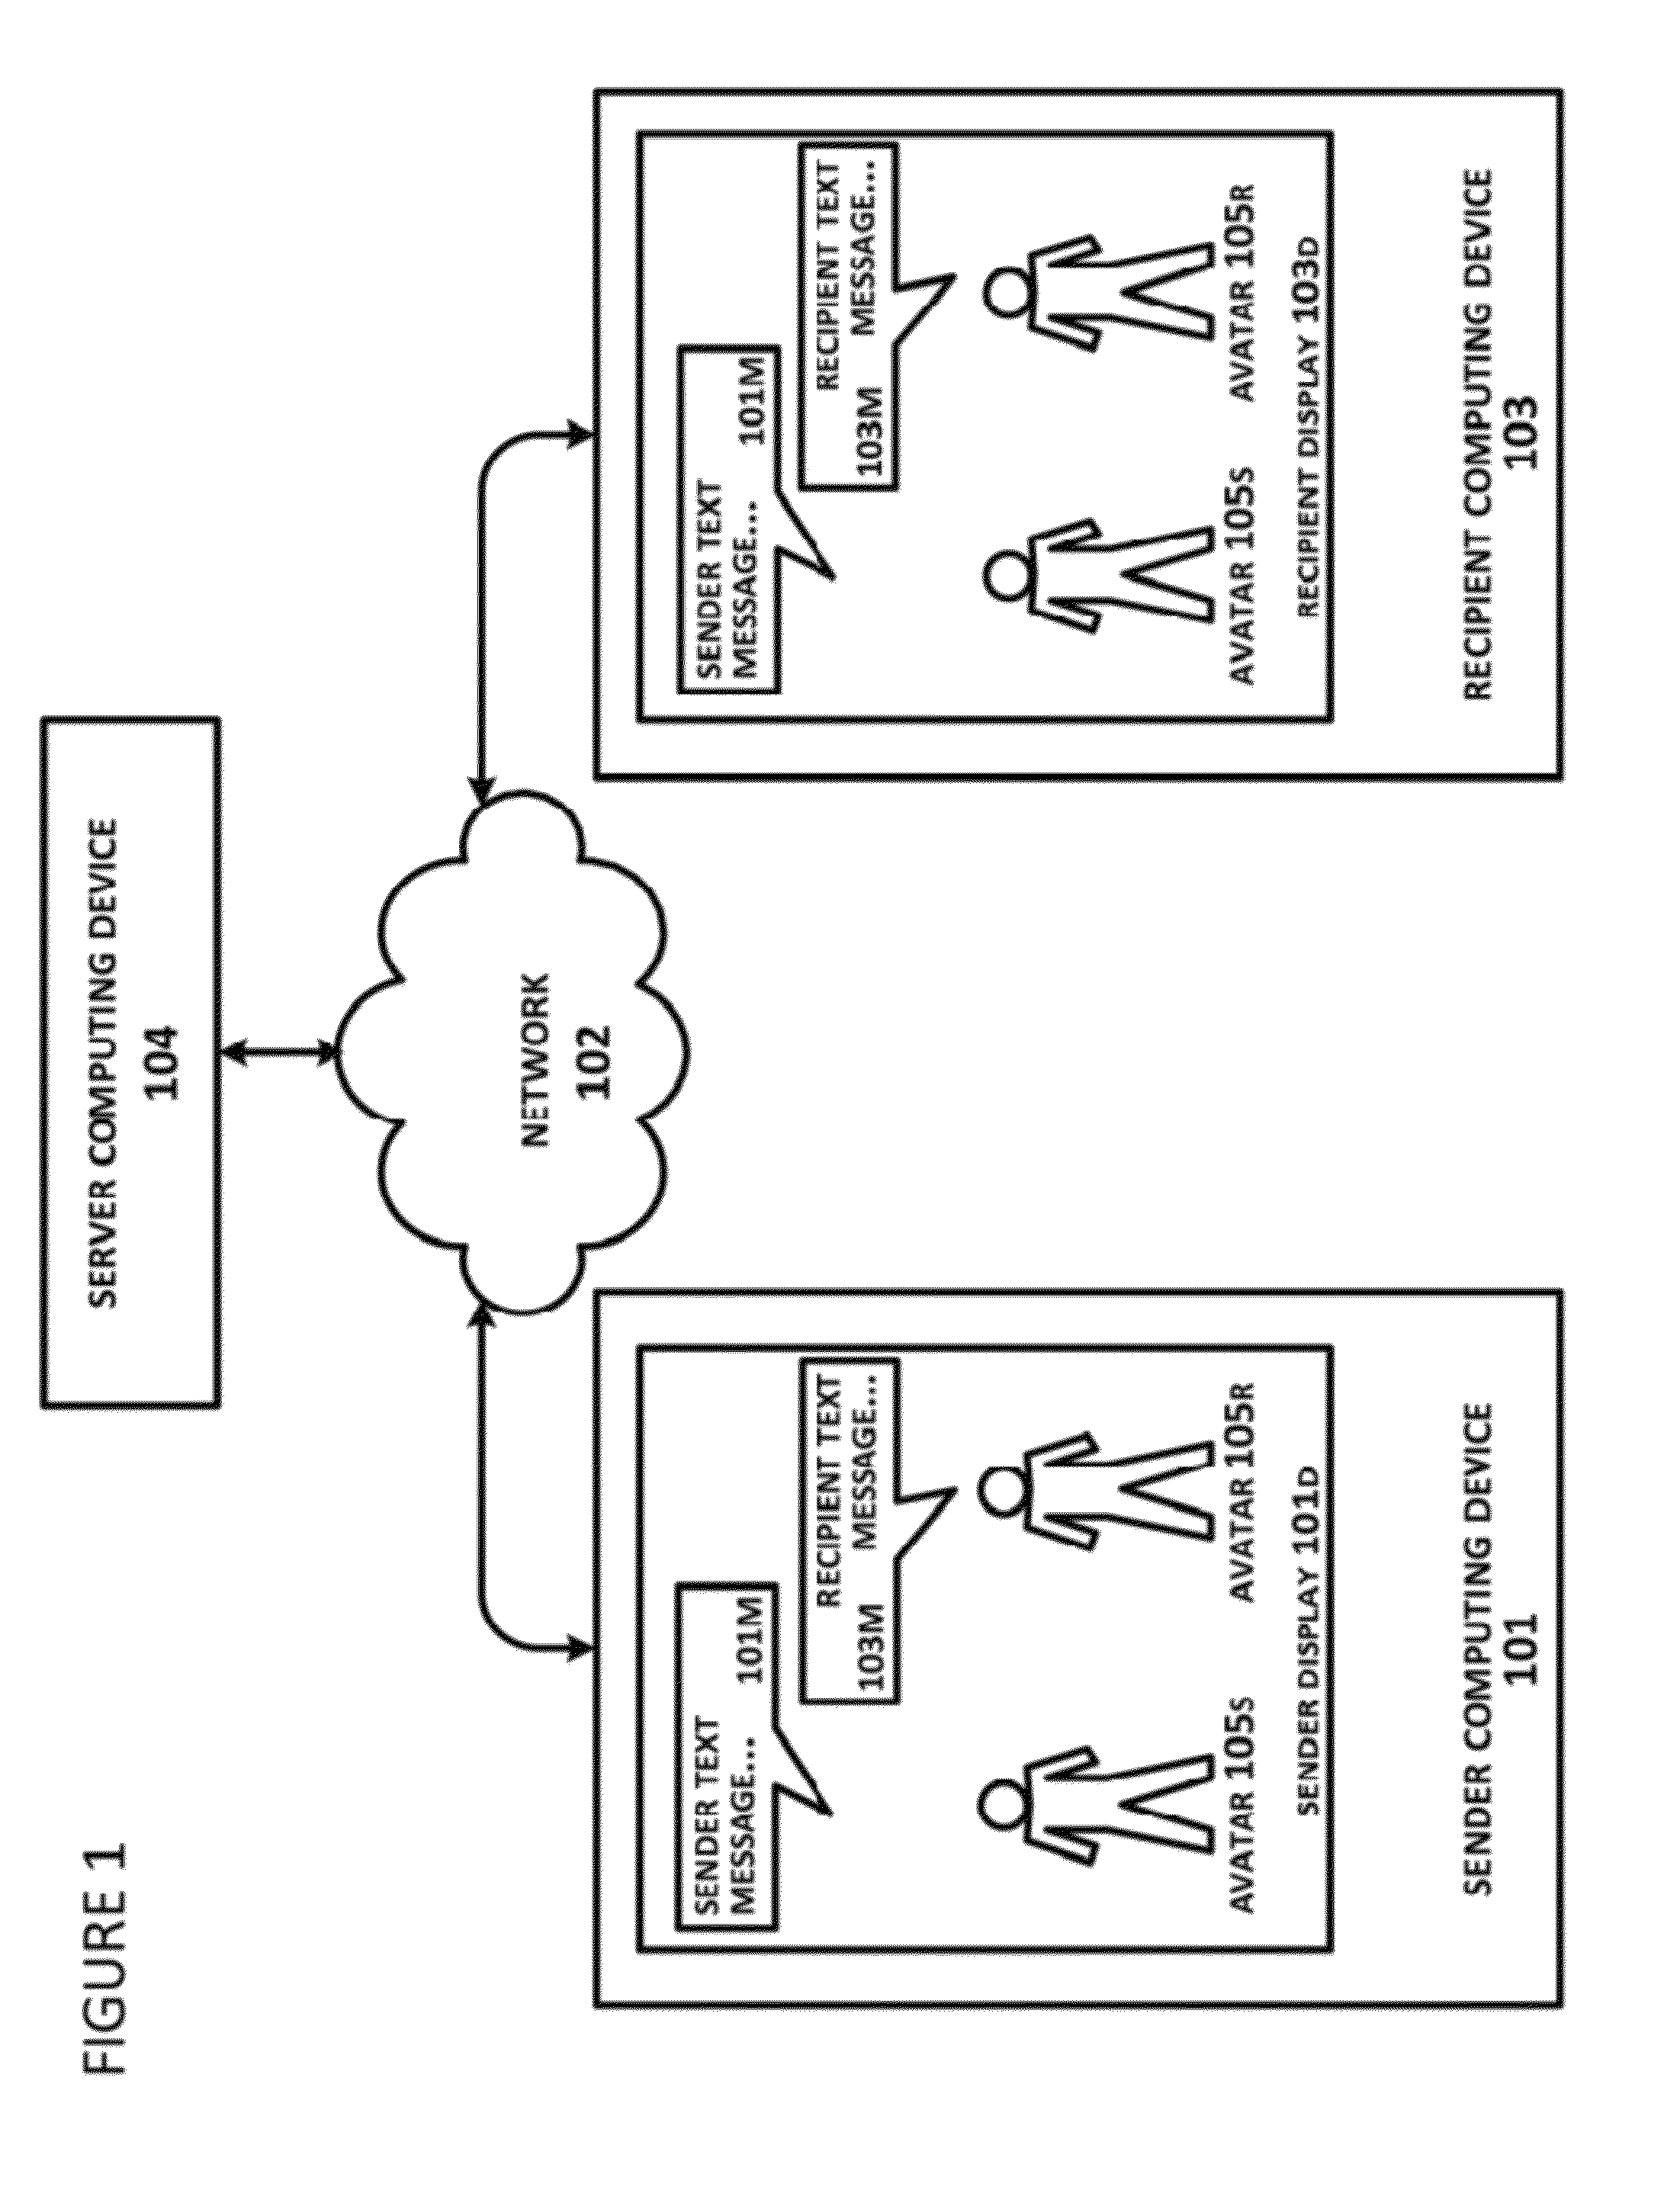 System and method for graphical expression during text messaging communications